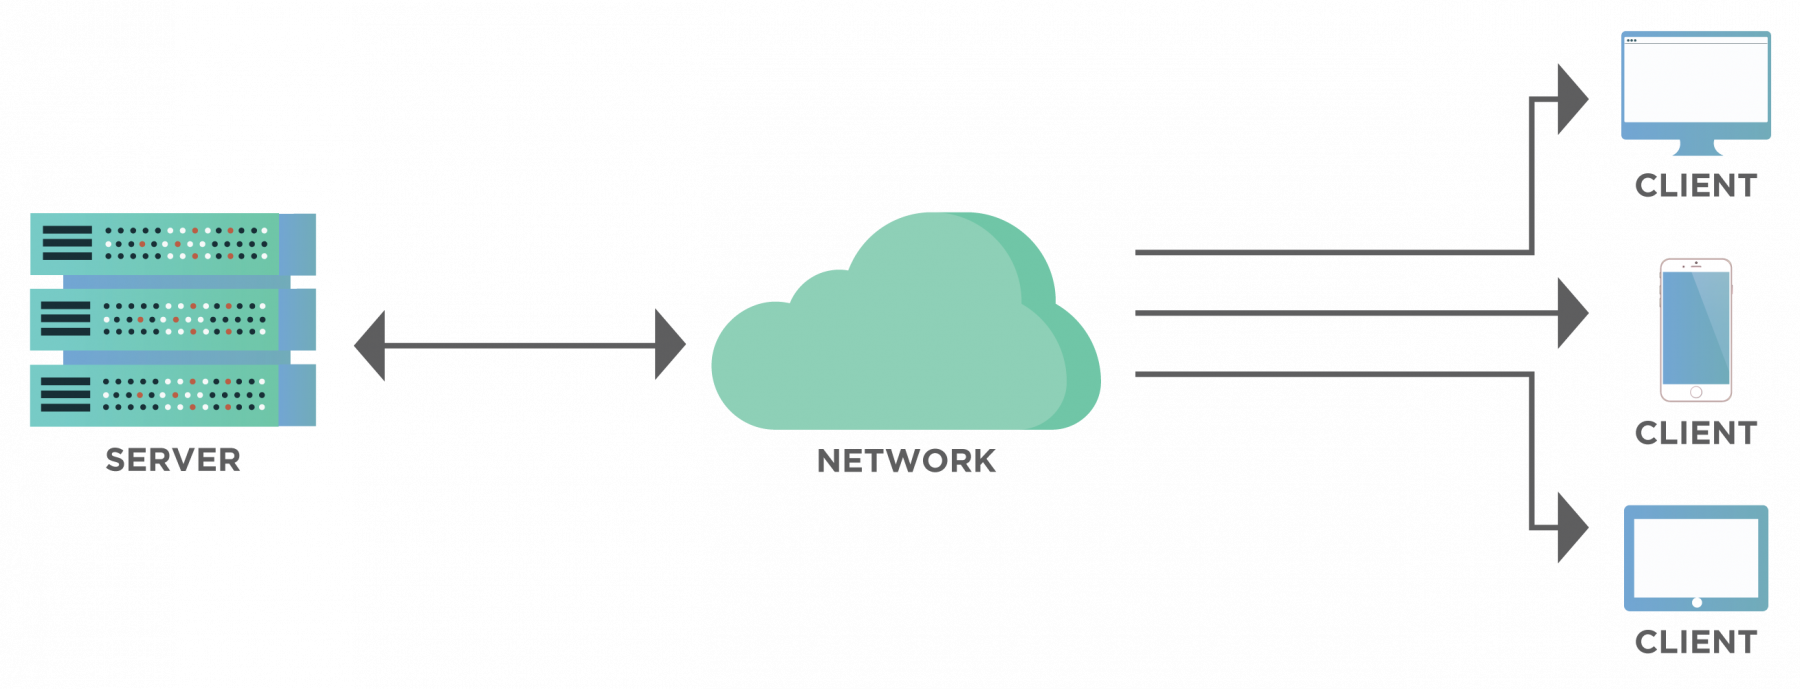 What Is Client Server Architecture And Protocol